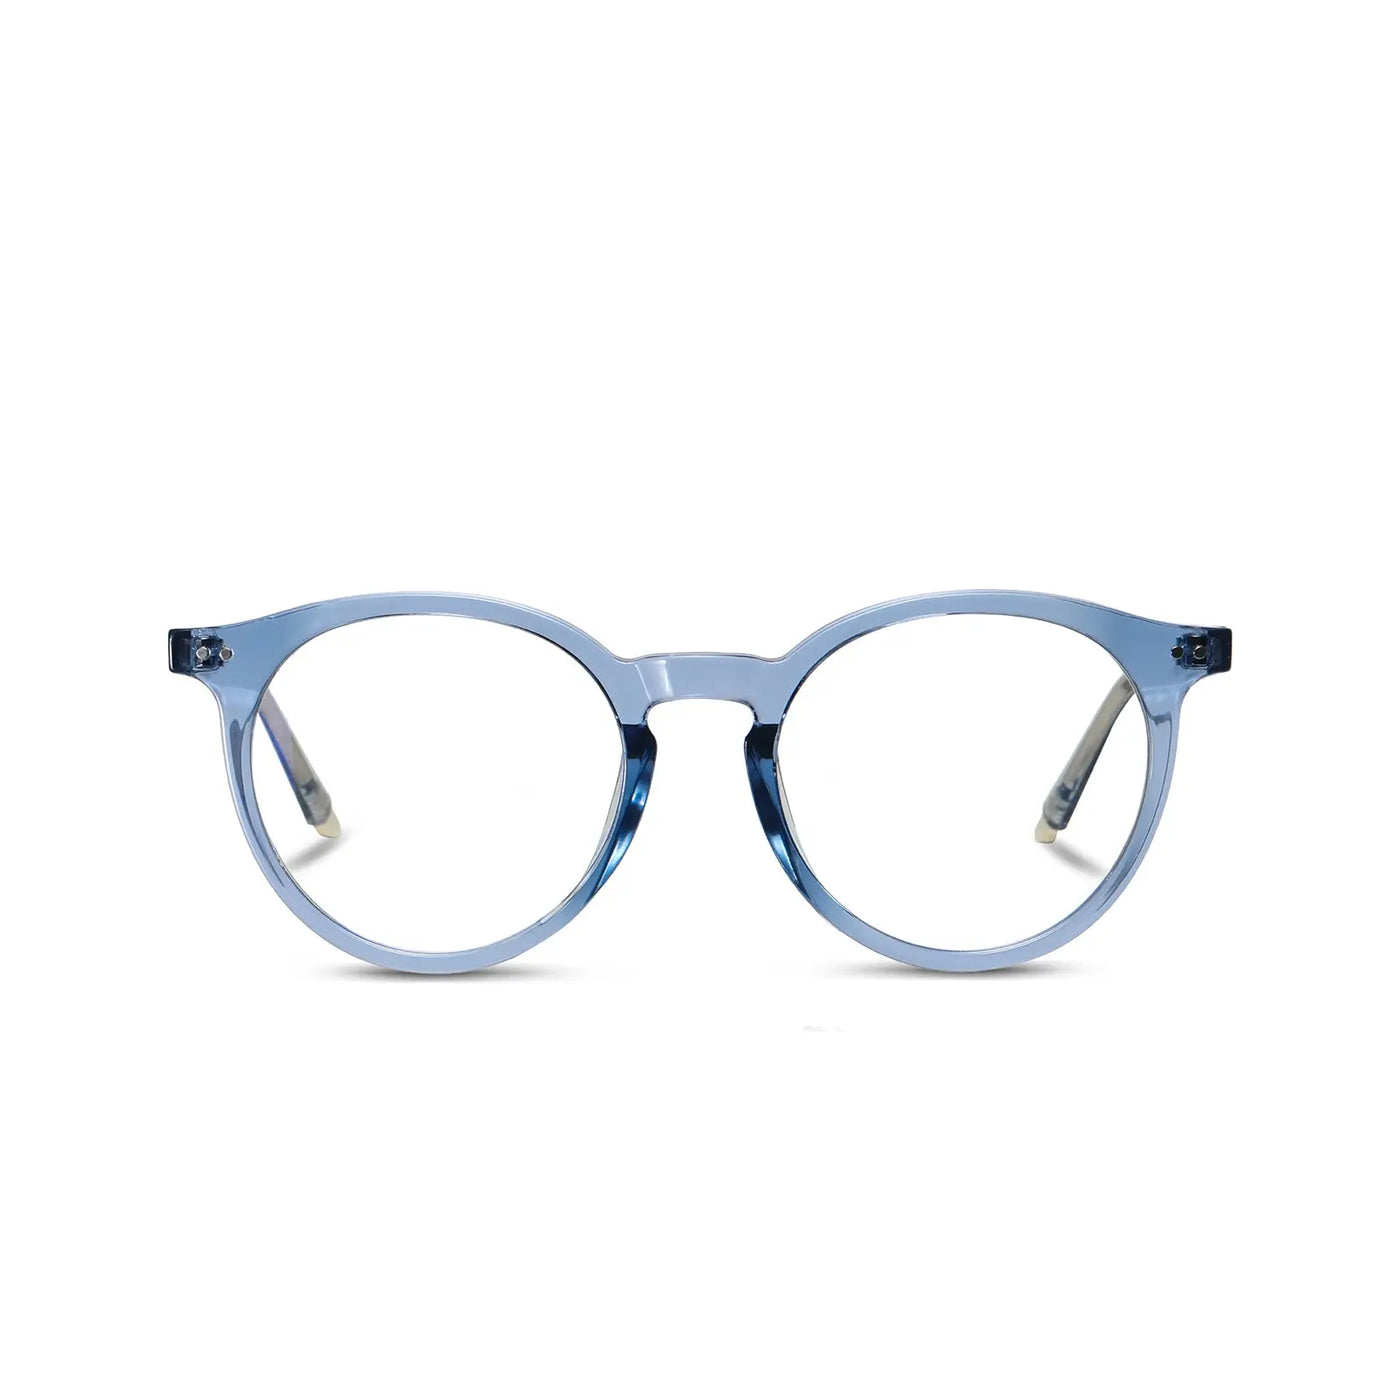 DUCO GLASSES-The right kind of shady DUCO Superlight Blue Light Blocking Computer Gaming Glasses for Women 5217 New DUCO Blue light